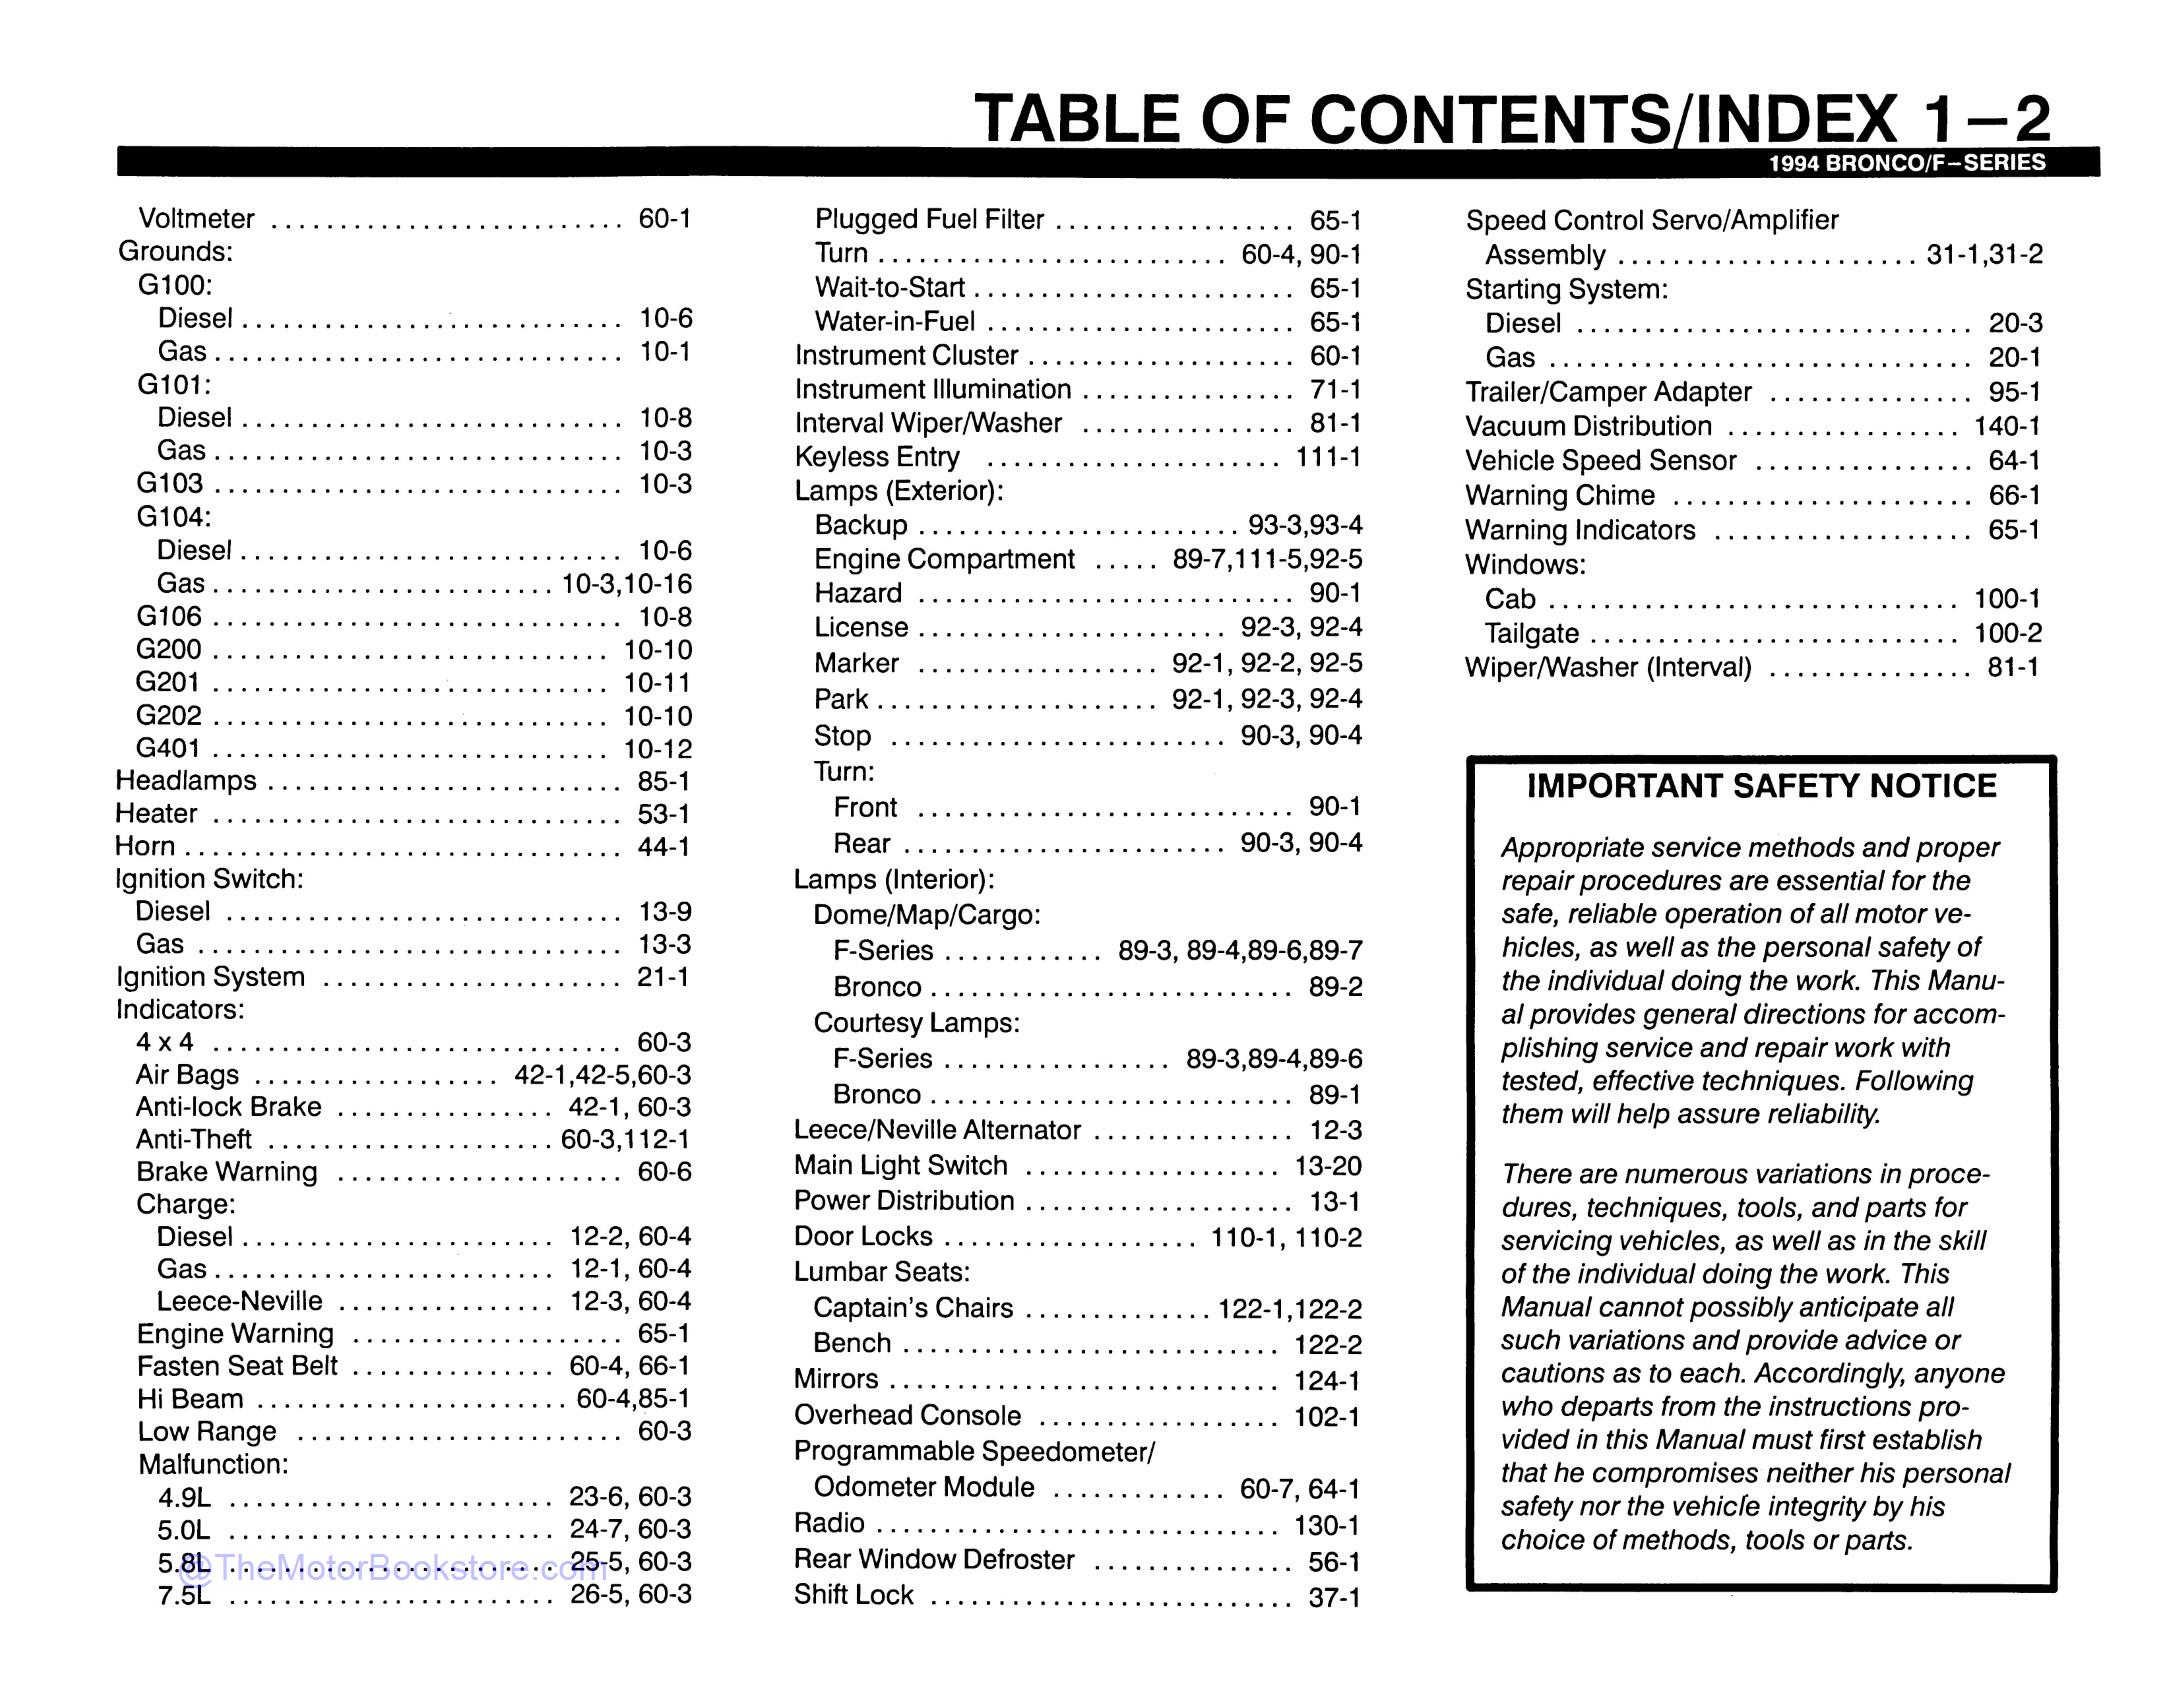 1994 Ford Truck Electrical Vacuum Troubleshooting Manual - F-Series, Bronco  - Table of Contents 2